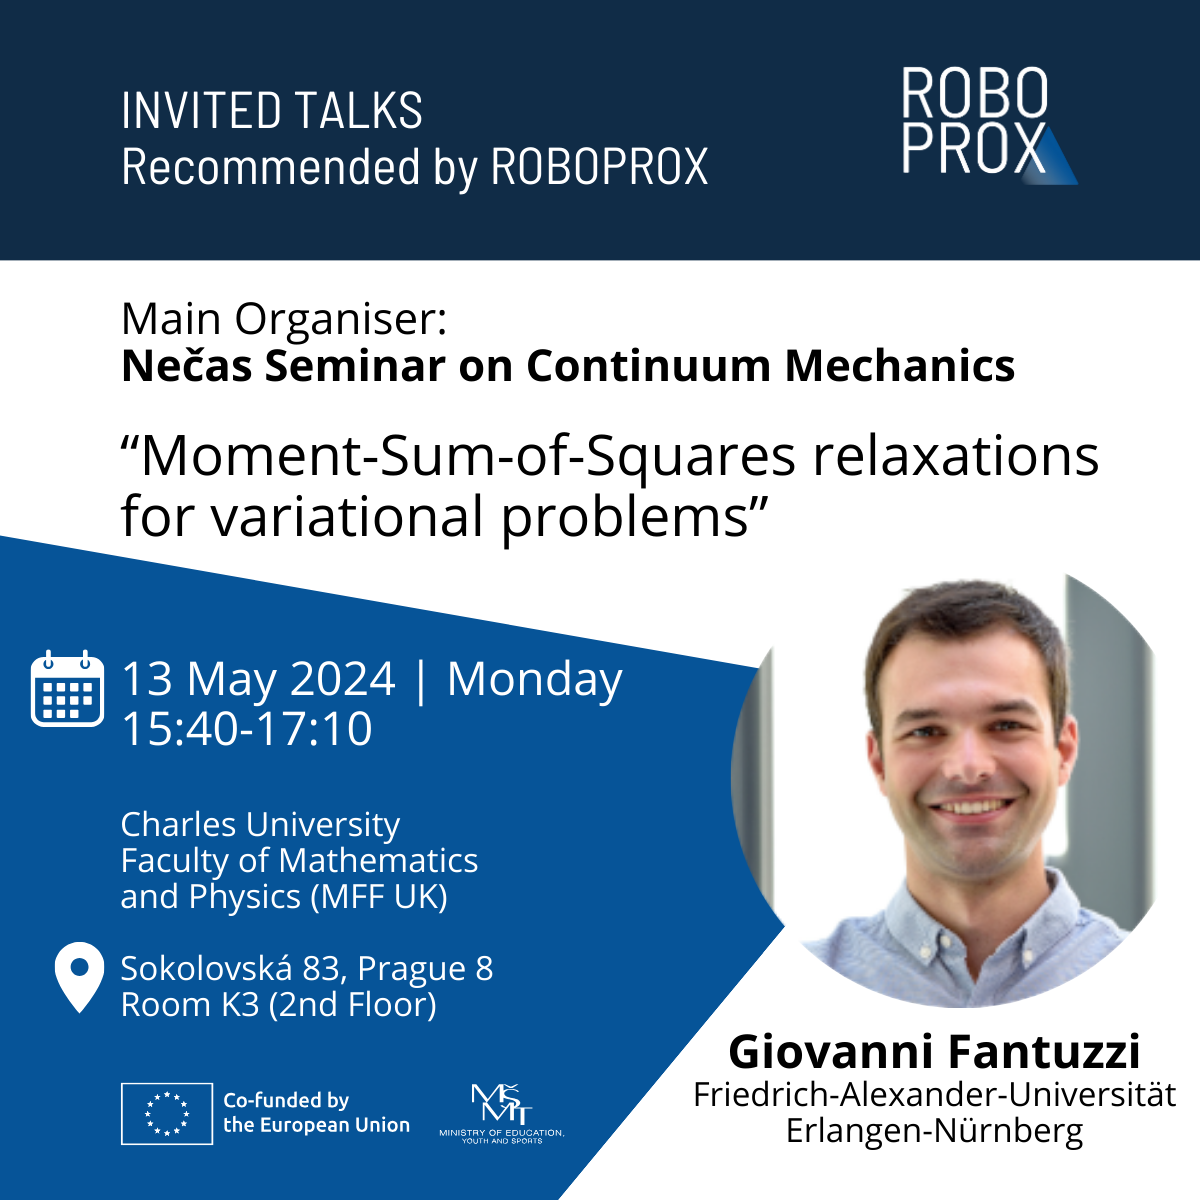 ROBOPROX Recommends: Prof. Giovanni Fantuzzi, 13 May 2024 in Prague